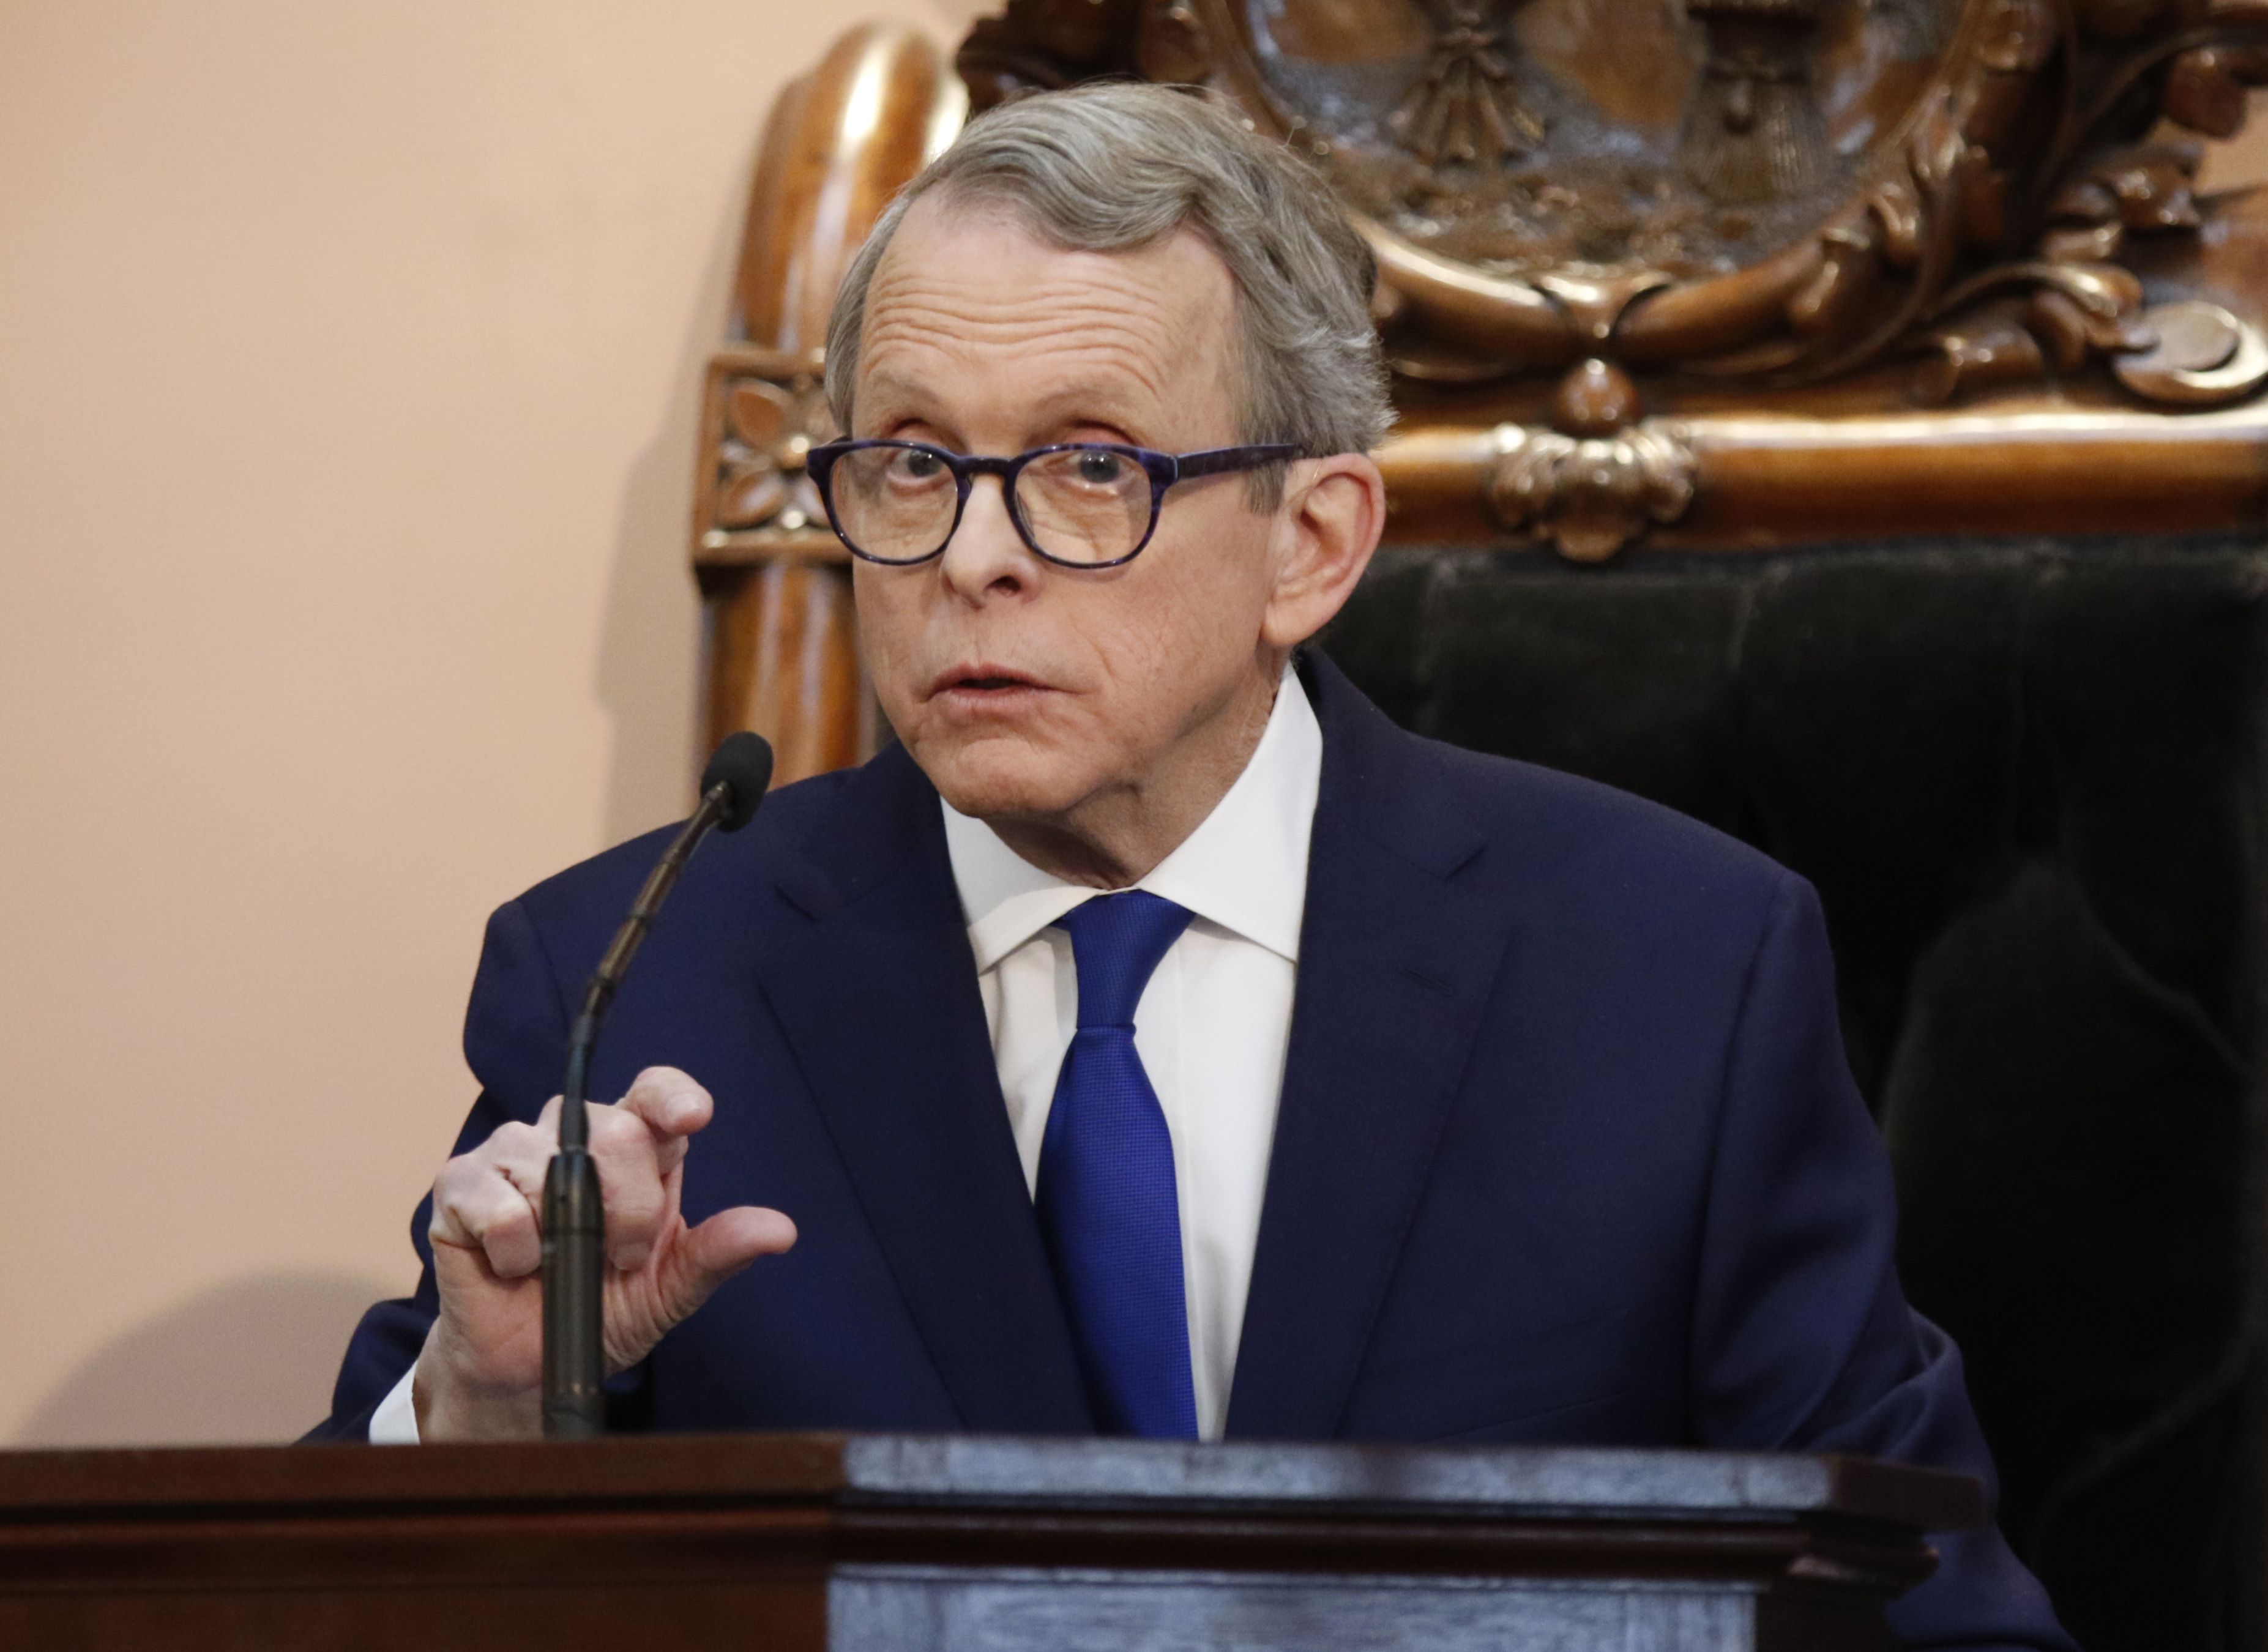 Gov. Mike DeWine calls for gun background checks, 'red flag' law in wake of  Dayton mass shooting 